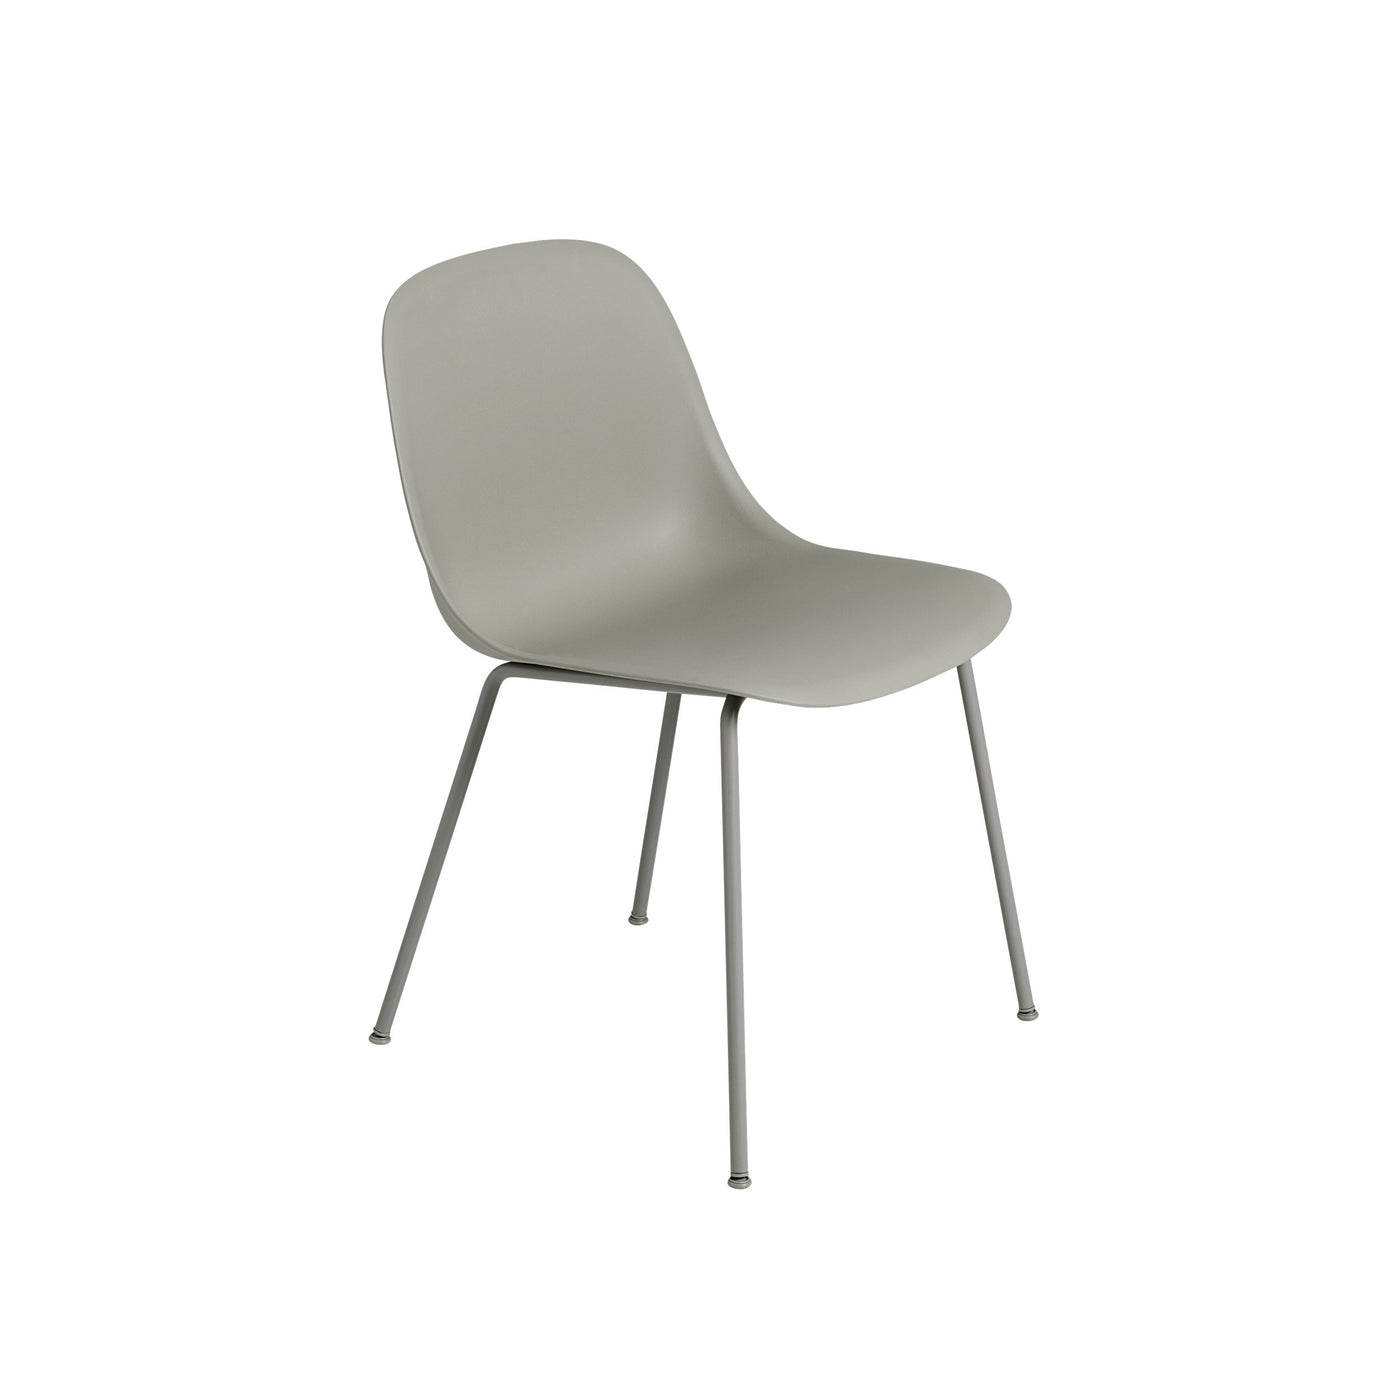 Muuto Fiber Side Chair Tube Base, grey seat and grey legs. Available from someday designs . #colour_grey